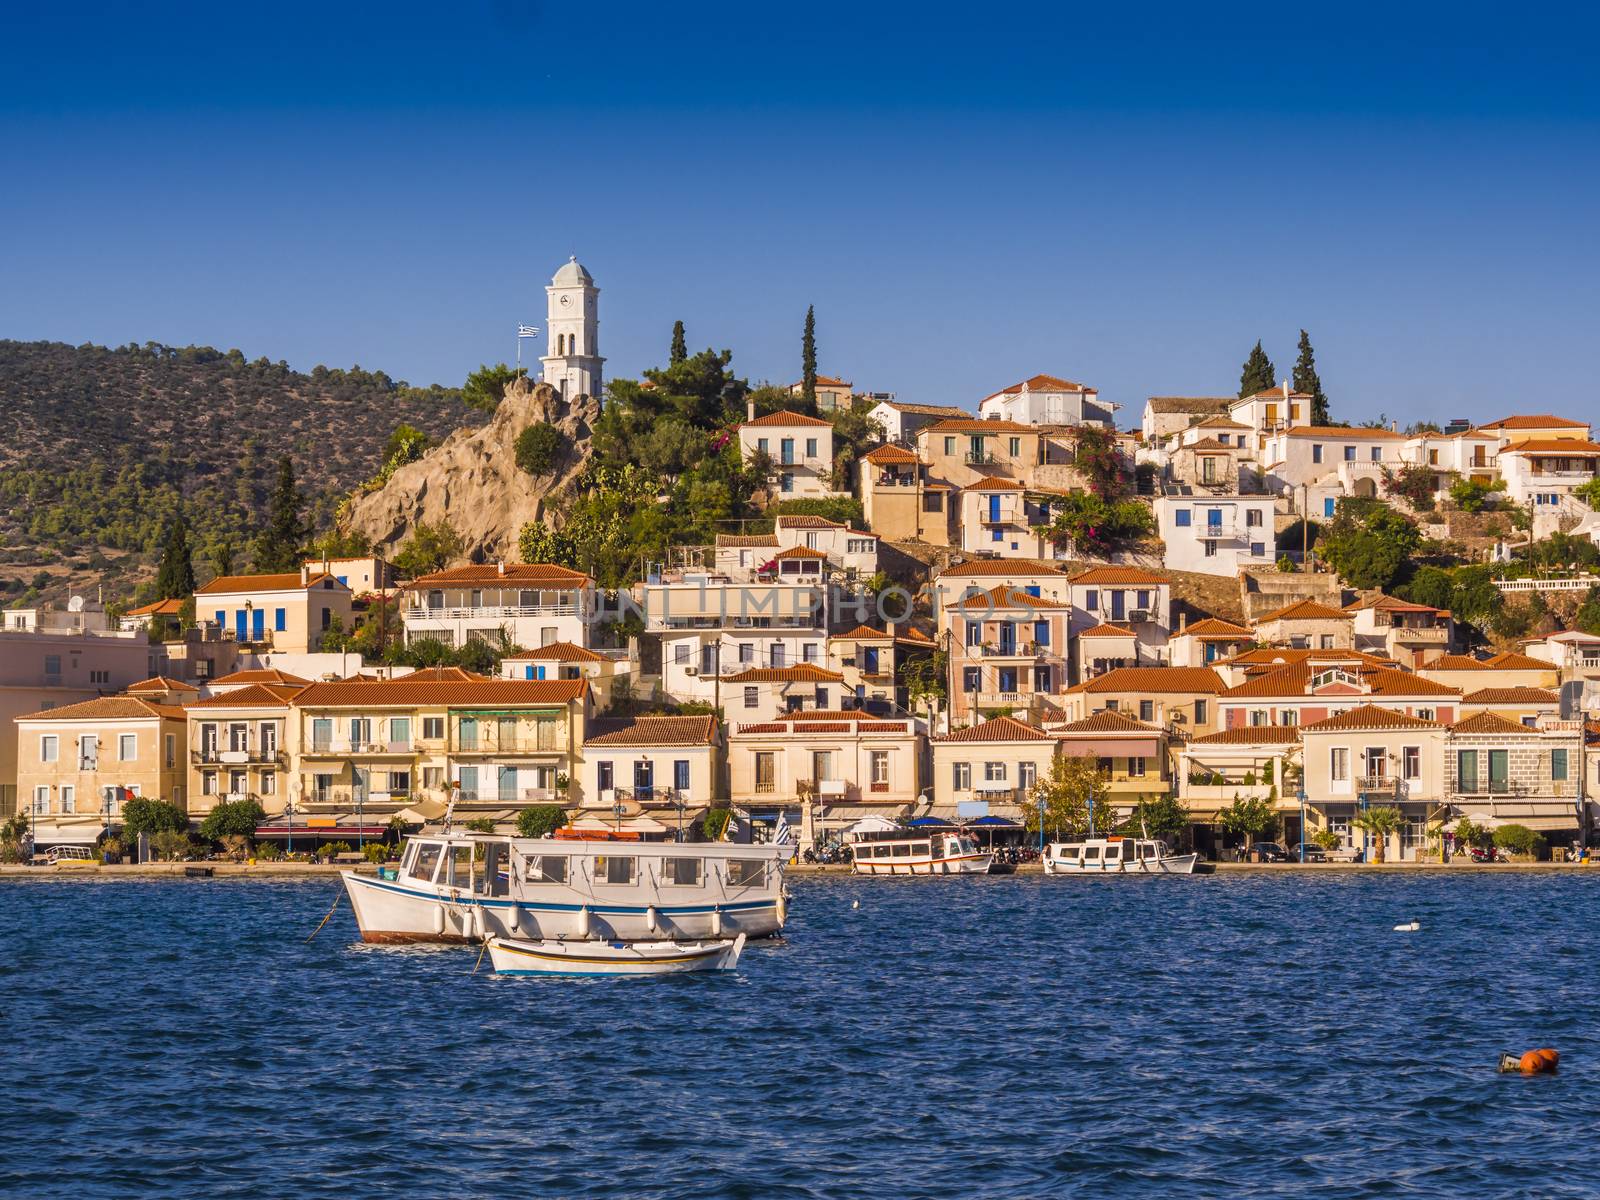 View of the island of Poros and Galatos, Greece